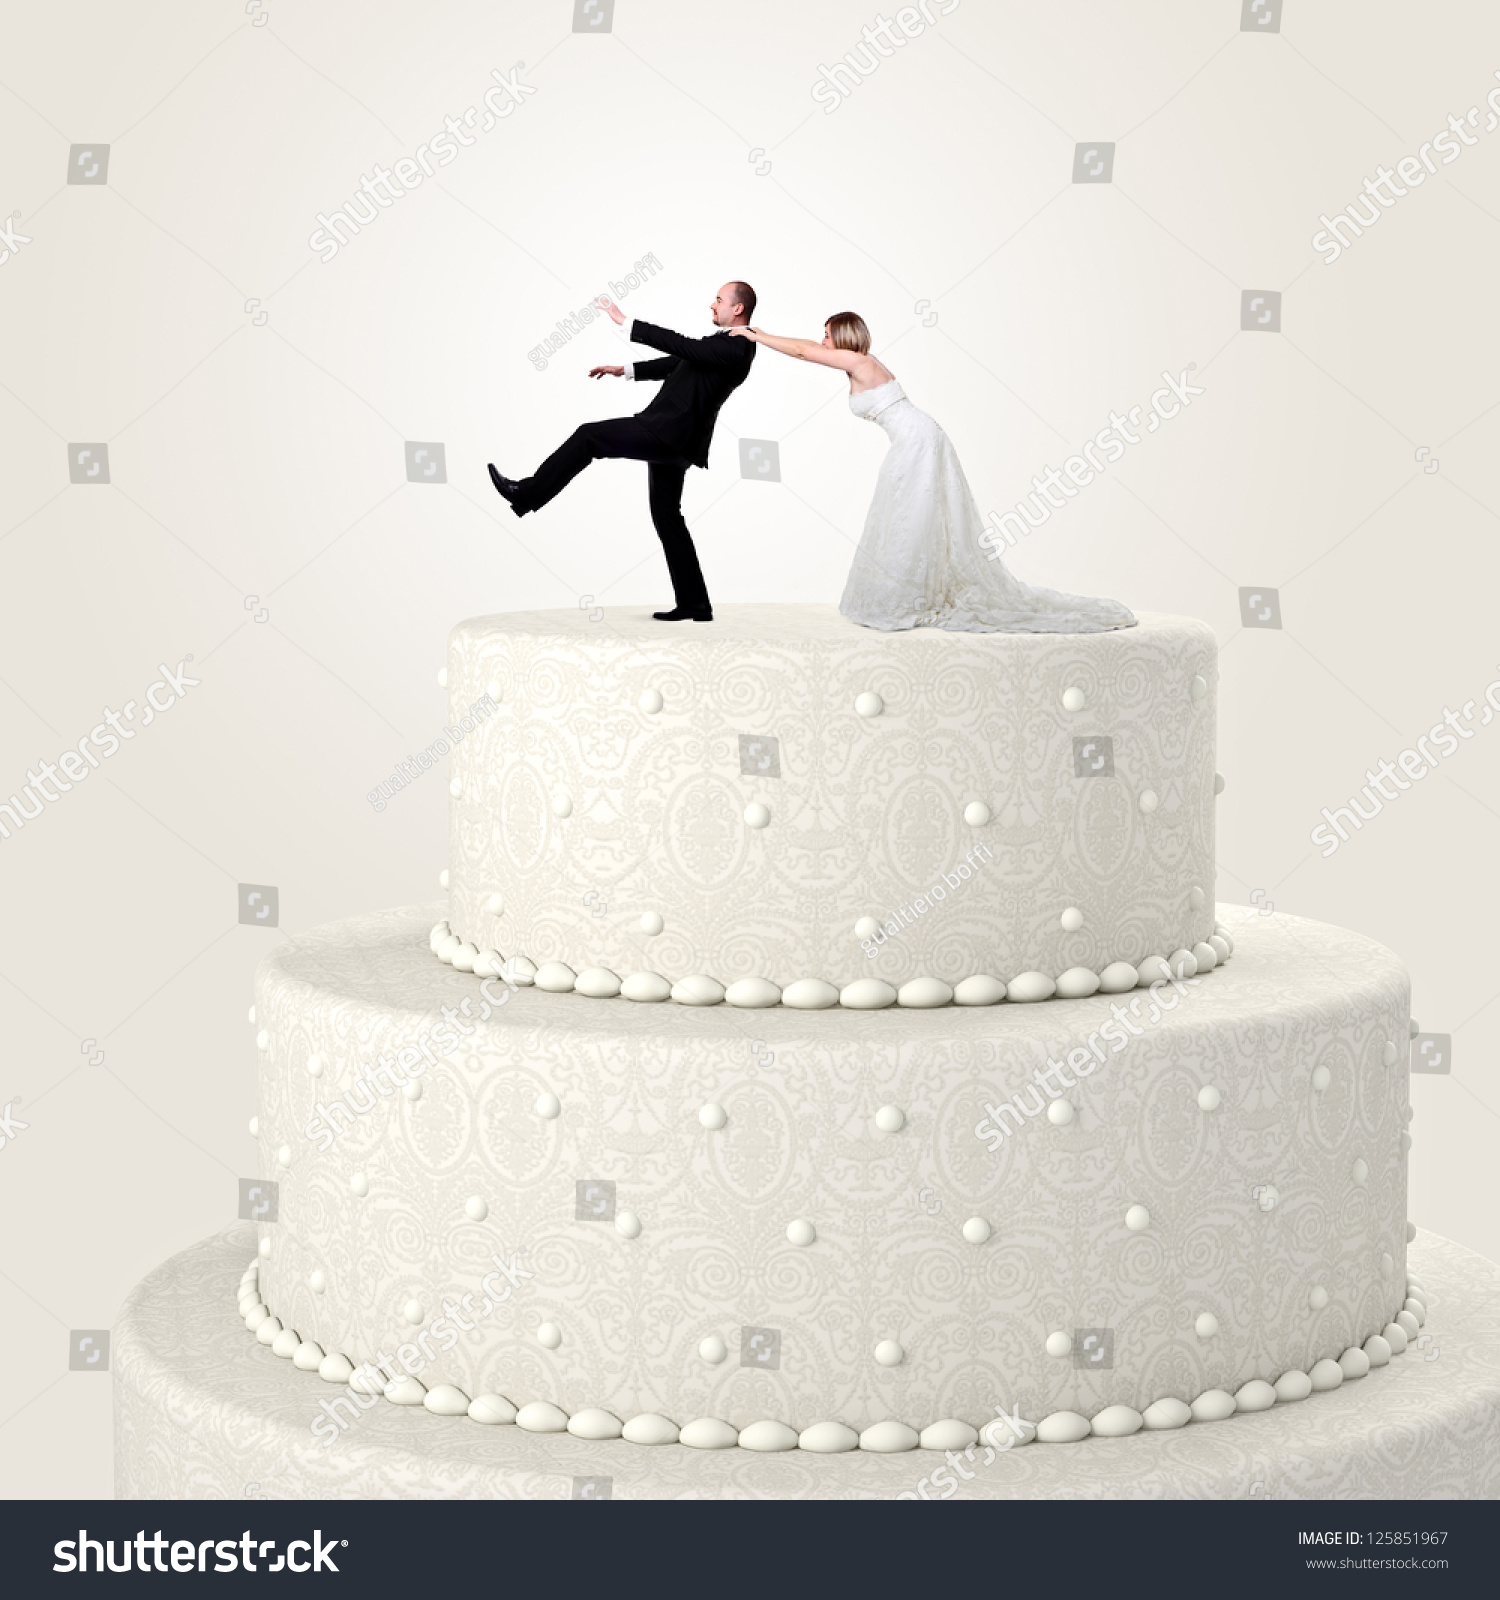  3d  Wedding  Cake  Funny Couple Situation Stock Photo 